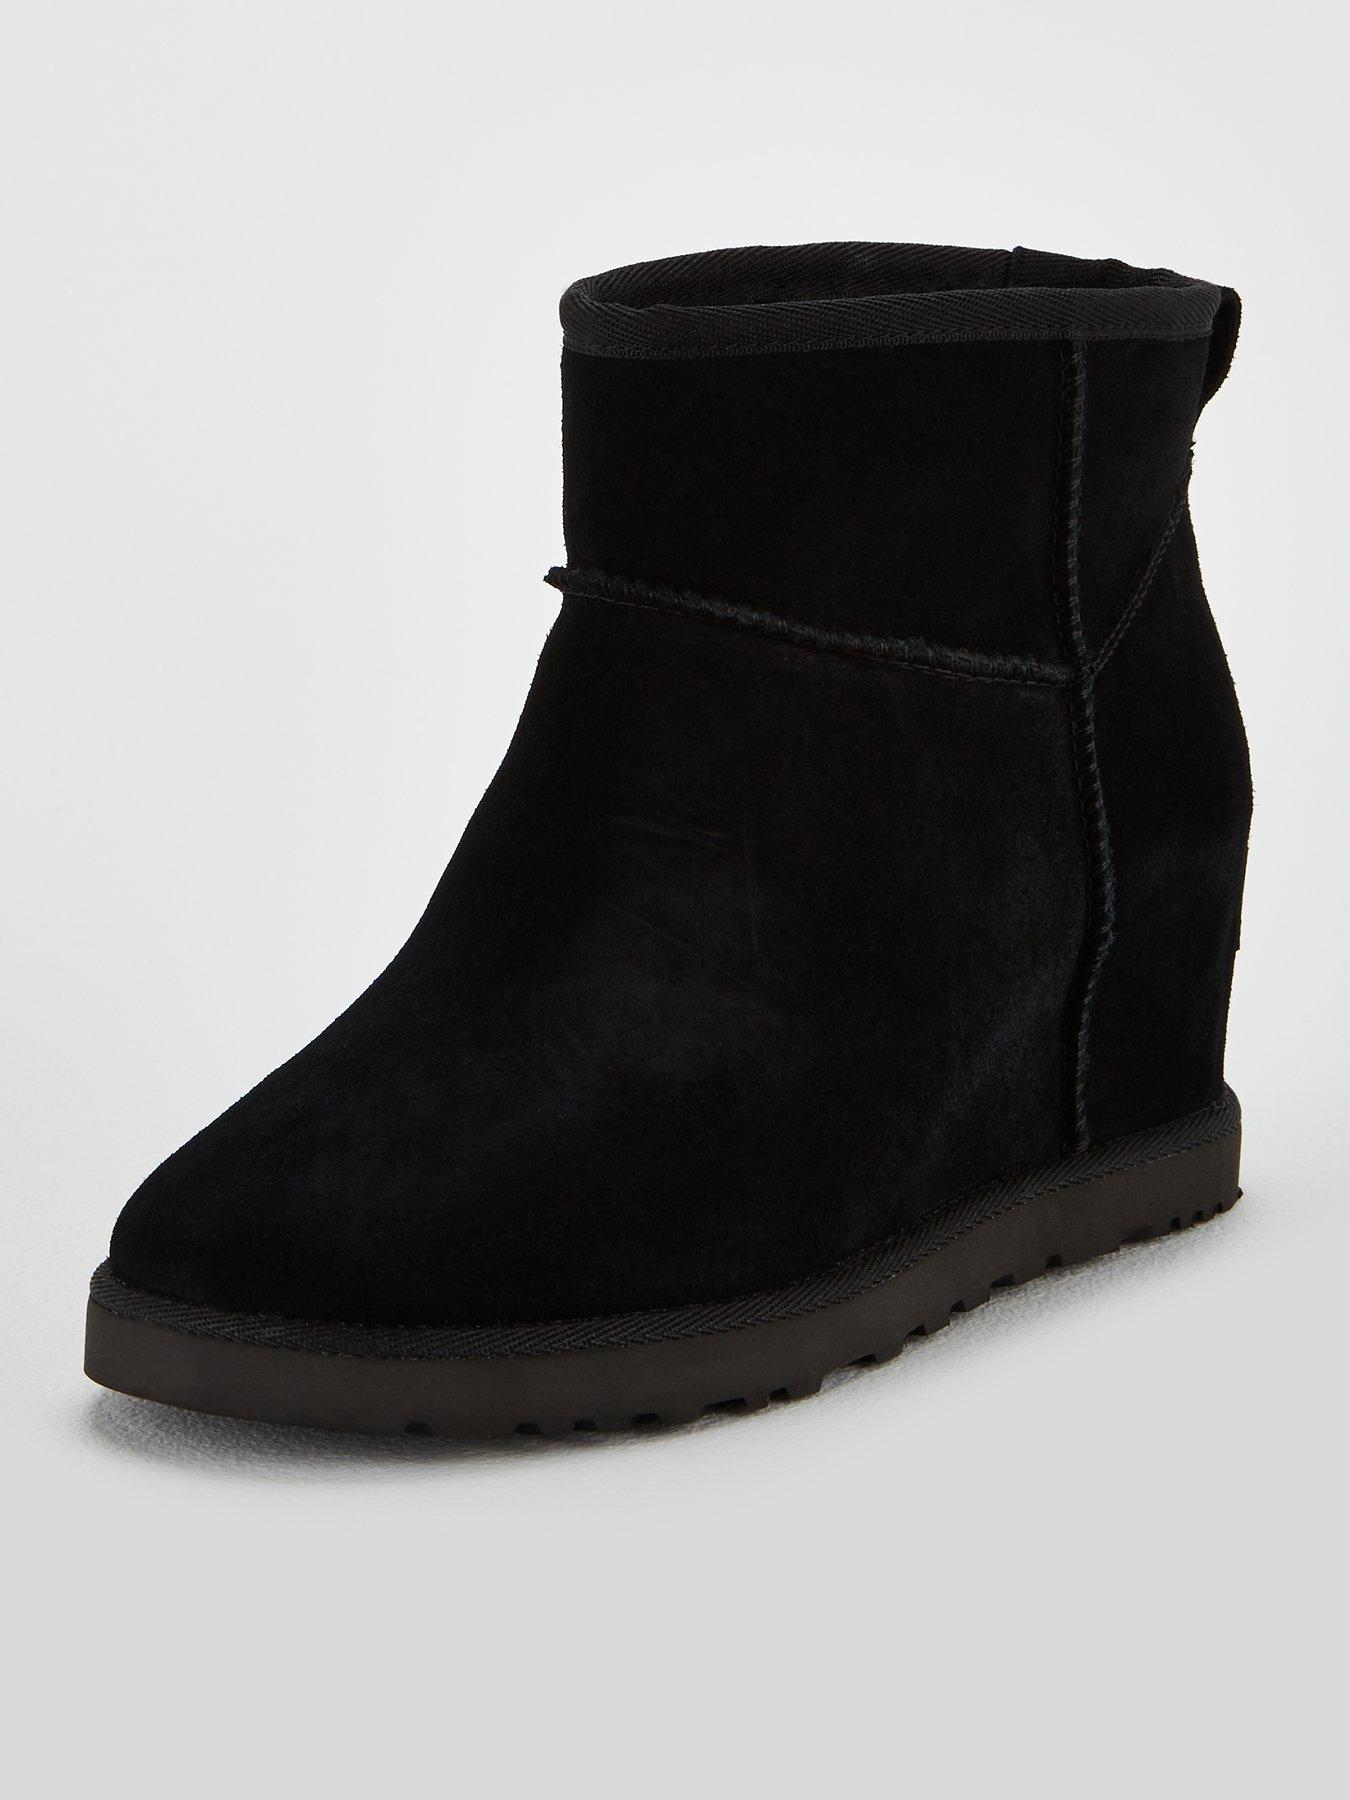 ugg ankle boots uk